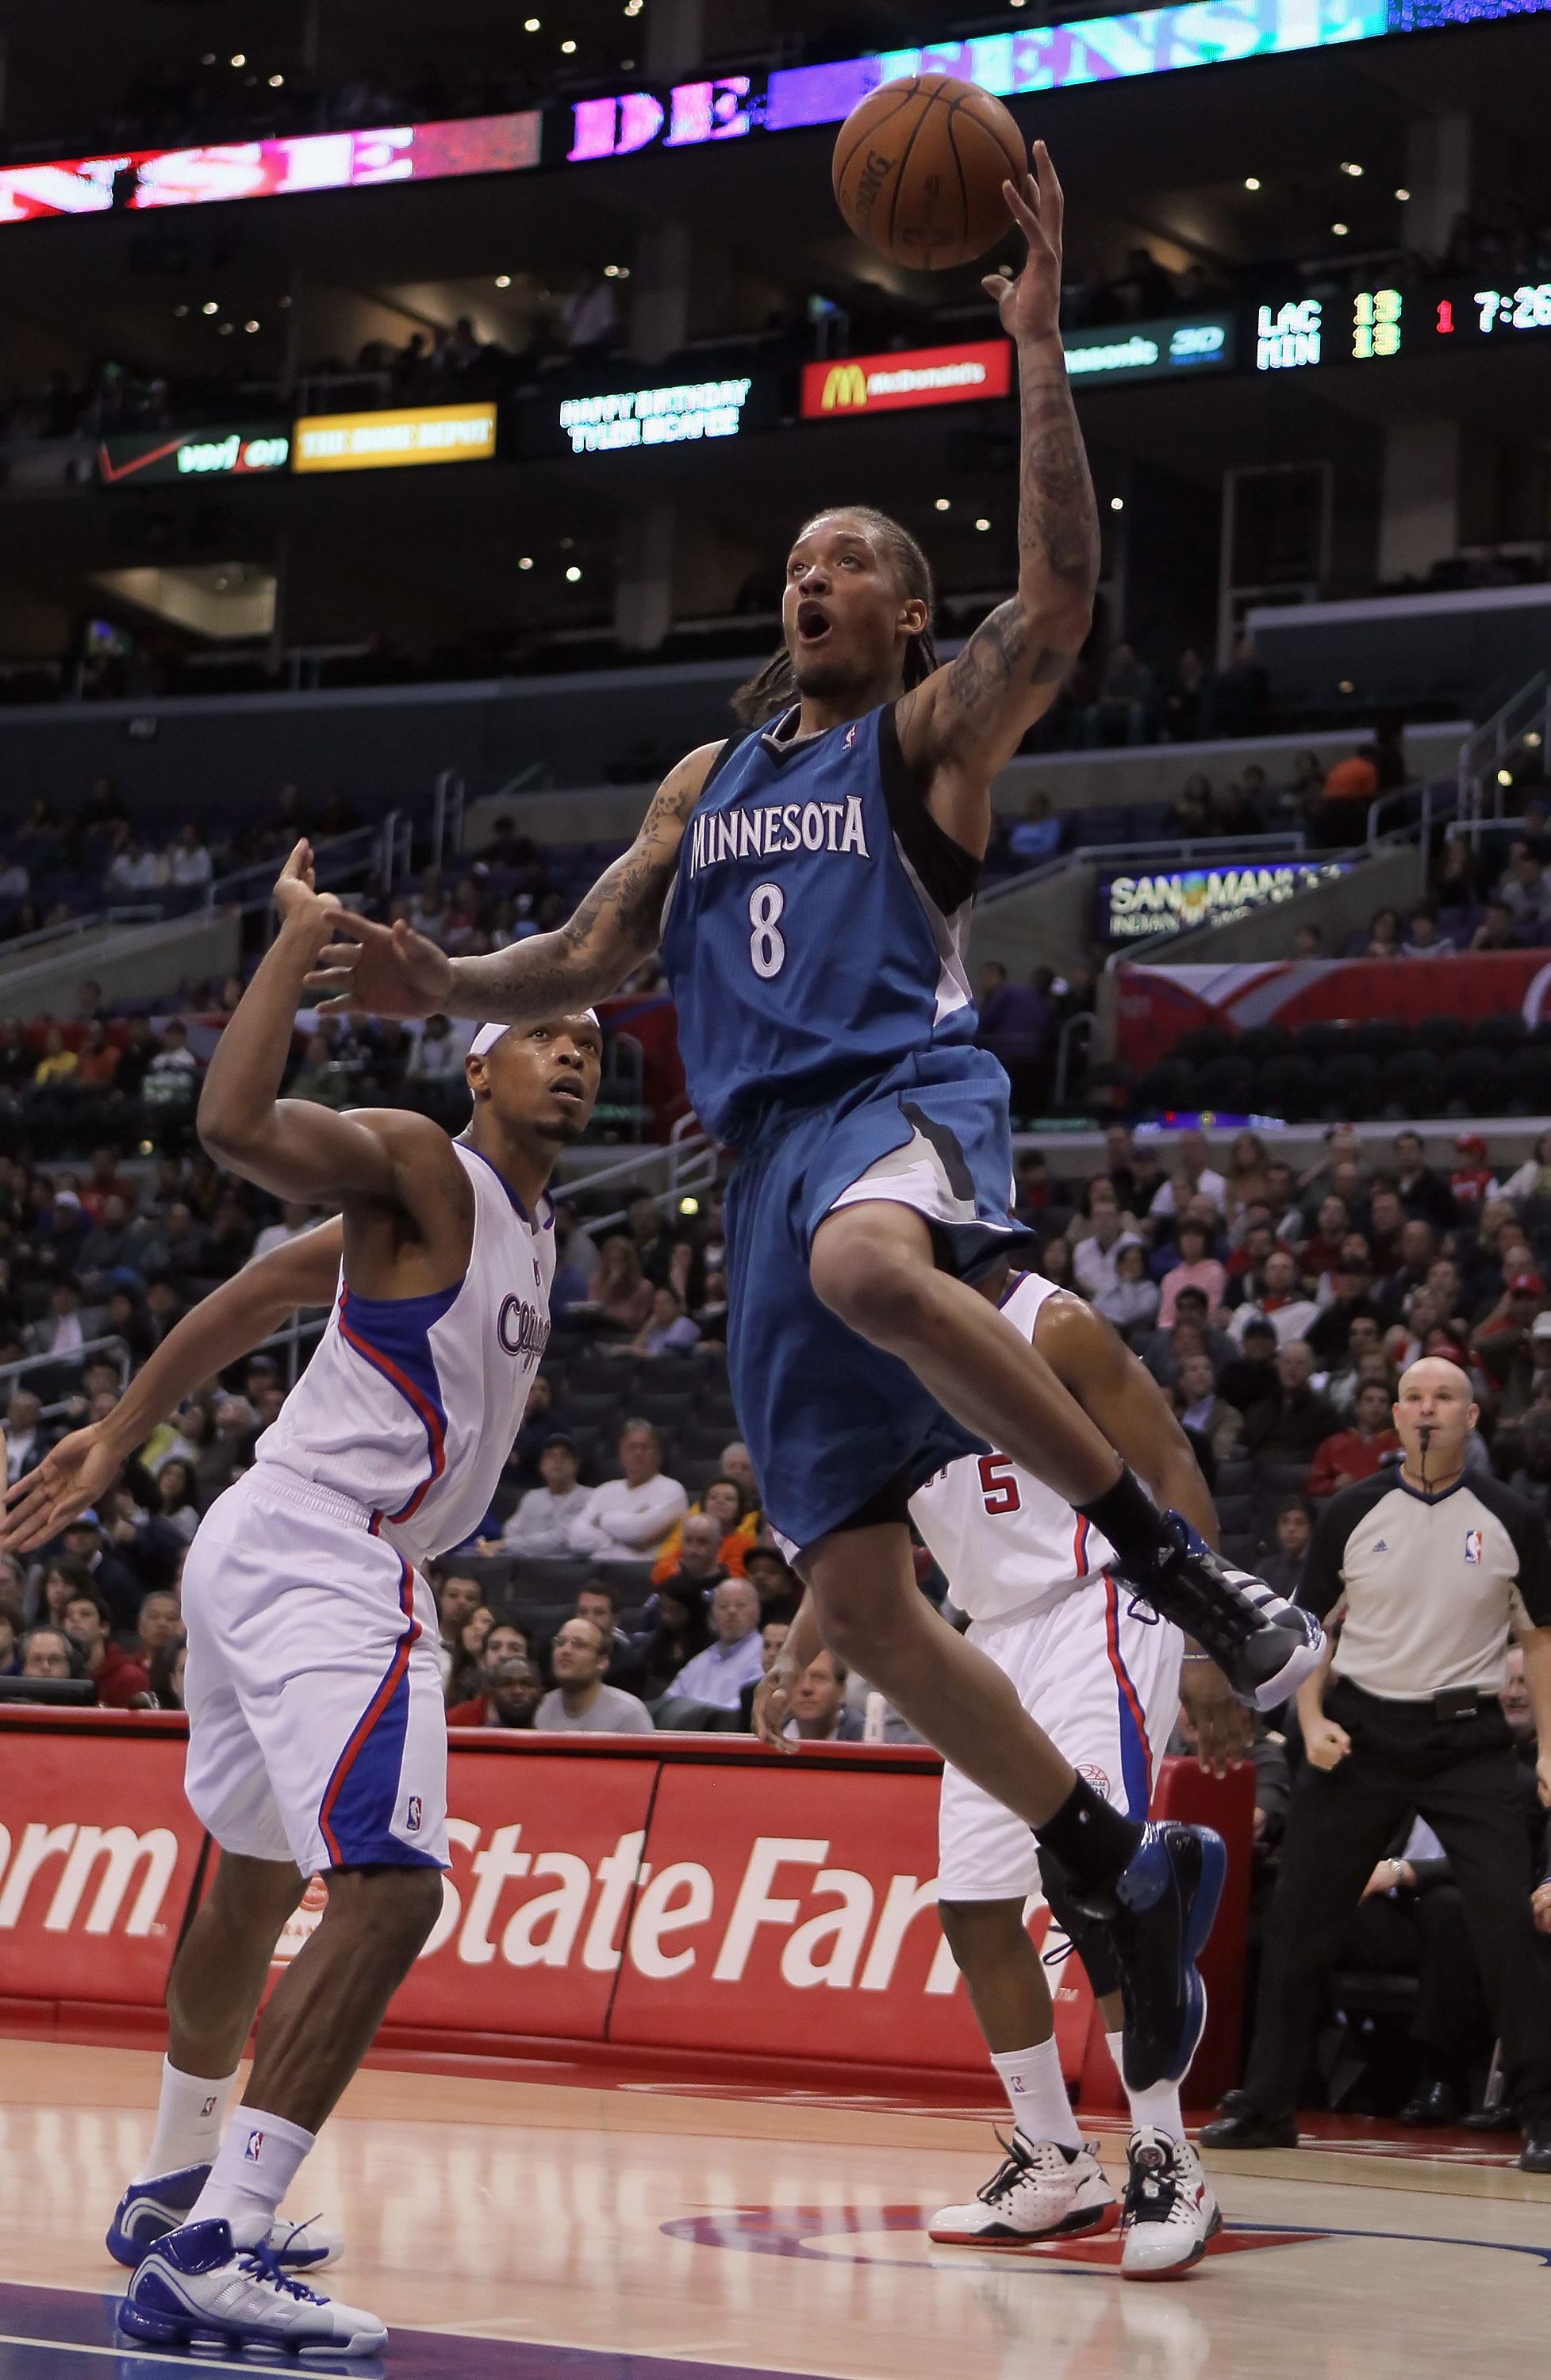 LOS ANGELES, CA - DECEMBER 20:  Michael Beasley #8 of the Minnesota Timberwolves drives to the basket past Ryan Gomes #15 of the Los Angeles Clippers during the first half at Staples Center on December 20, 2010 in Los Angeles, California. NOTE TO USER: Us